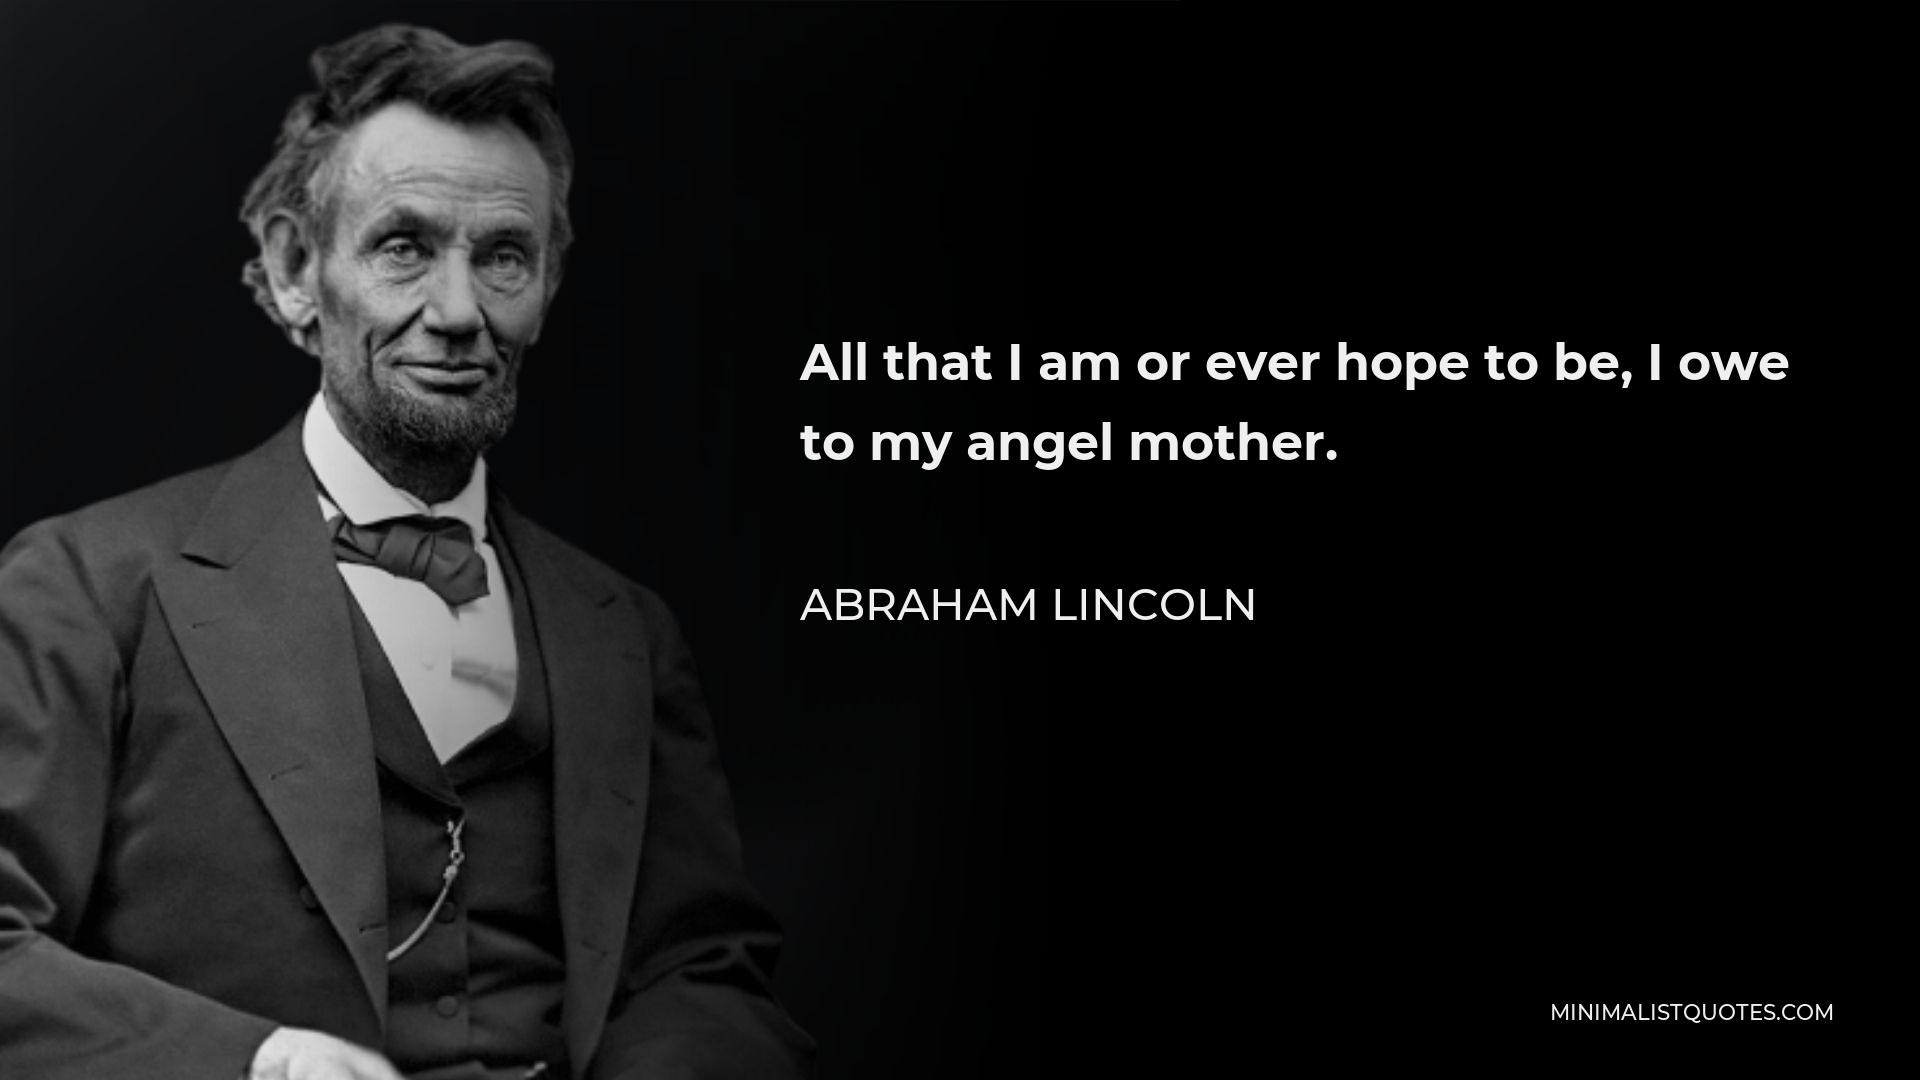 Abraham Lincoln Quote - All that I am or ever hope to be, I owe to my angel mother.